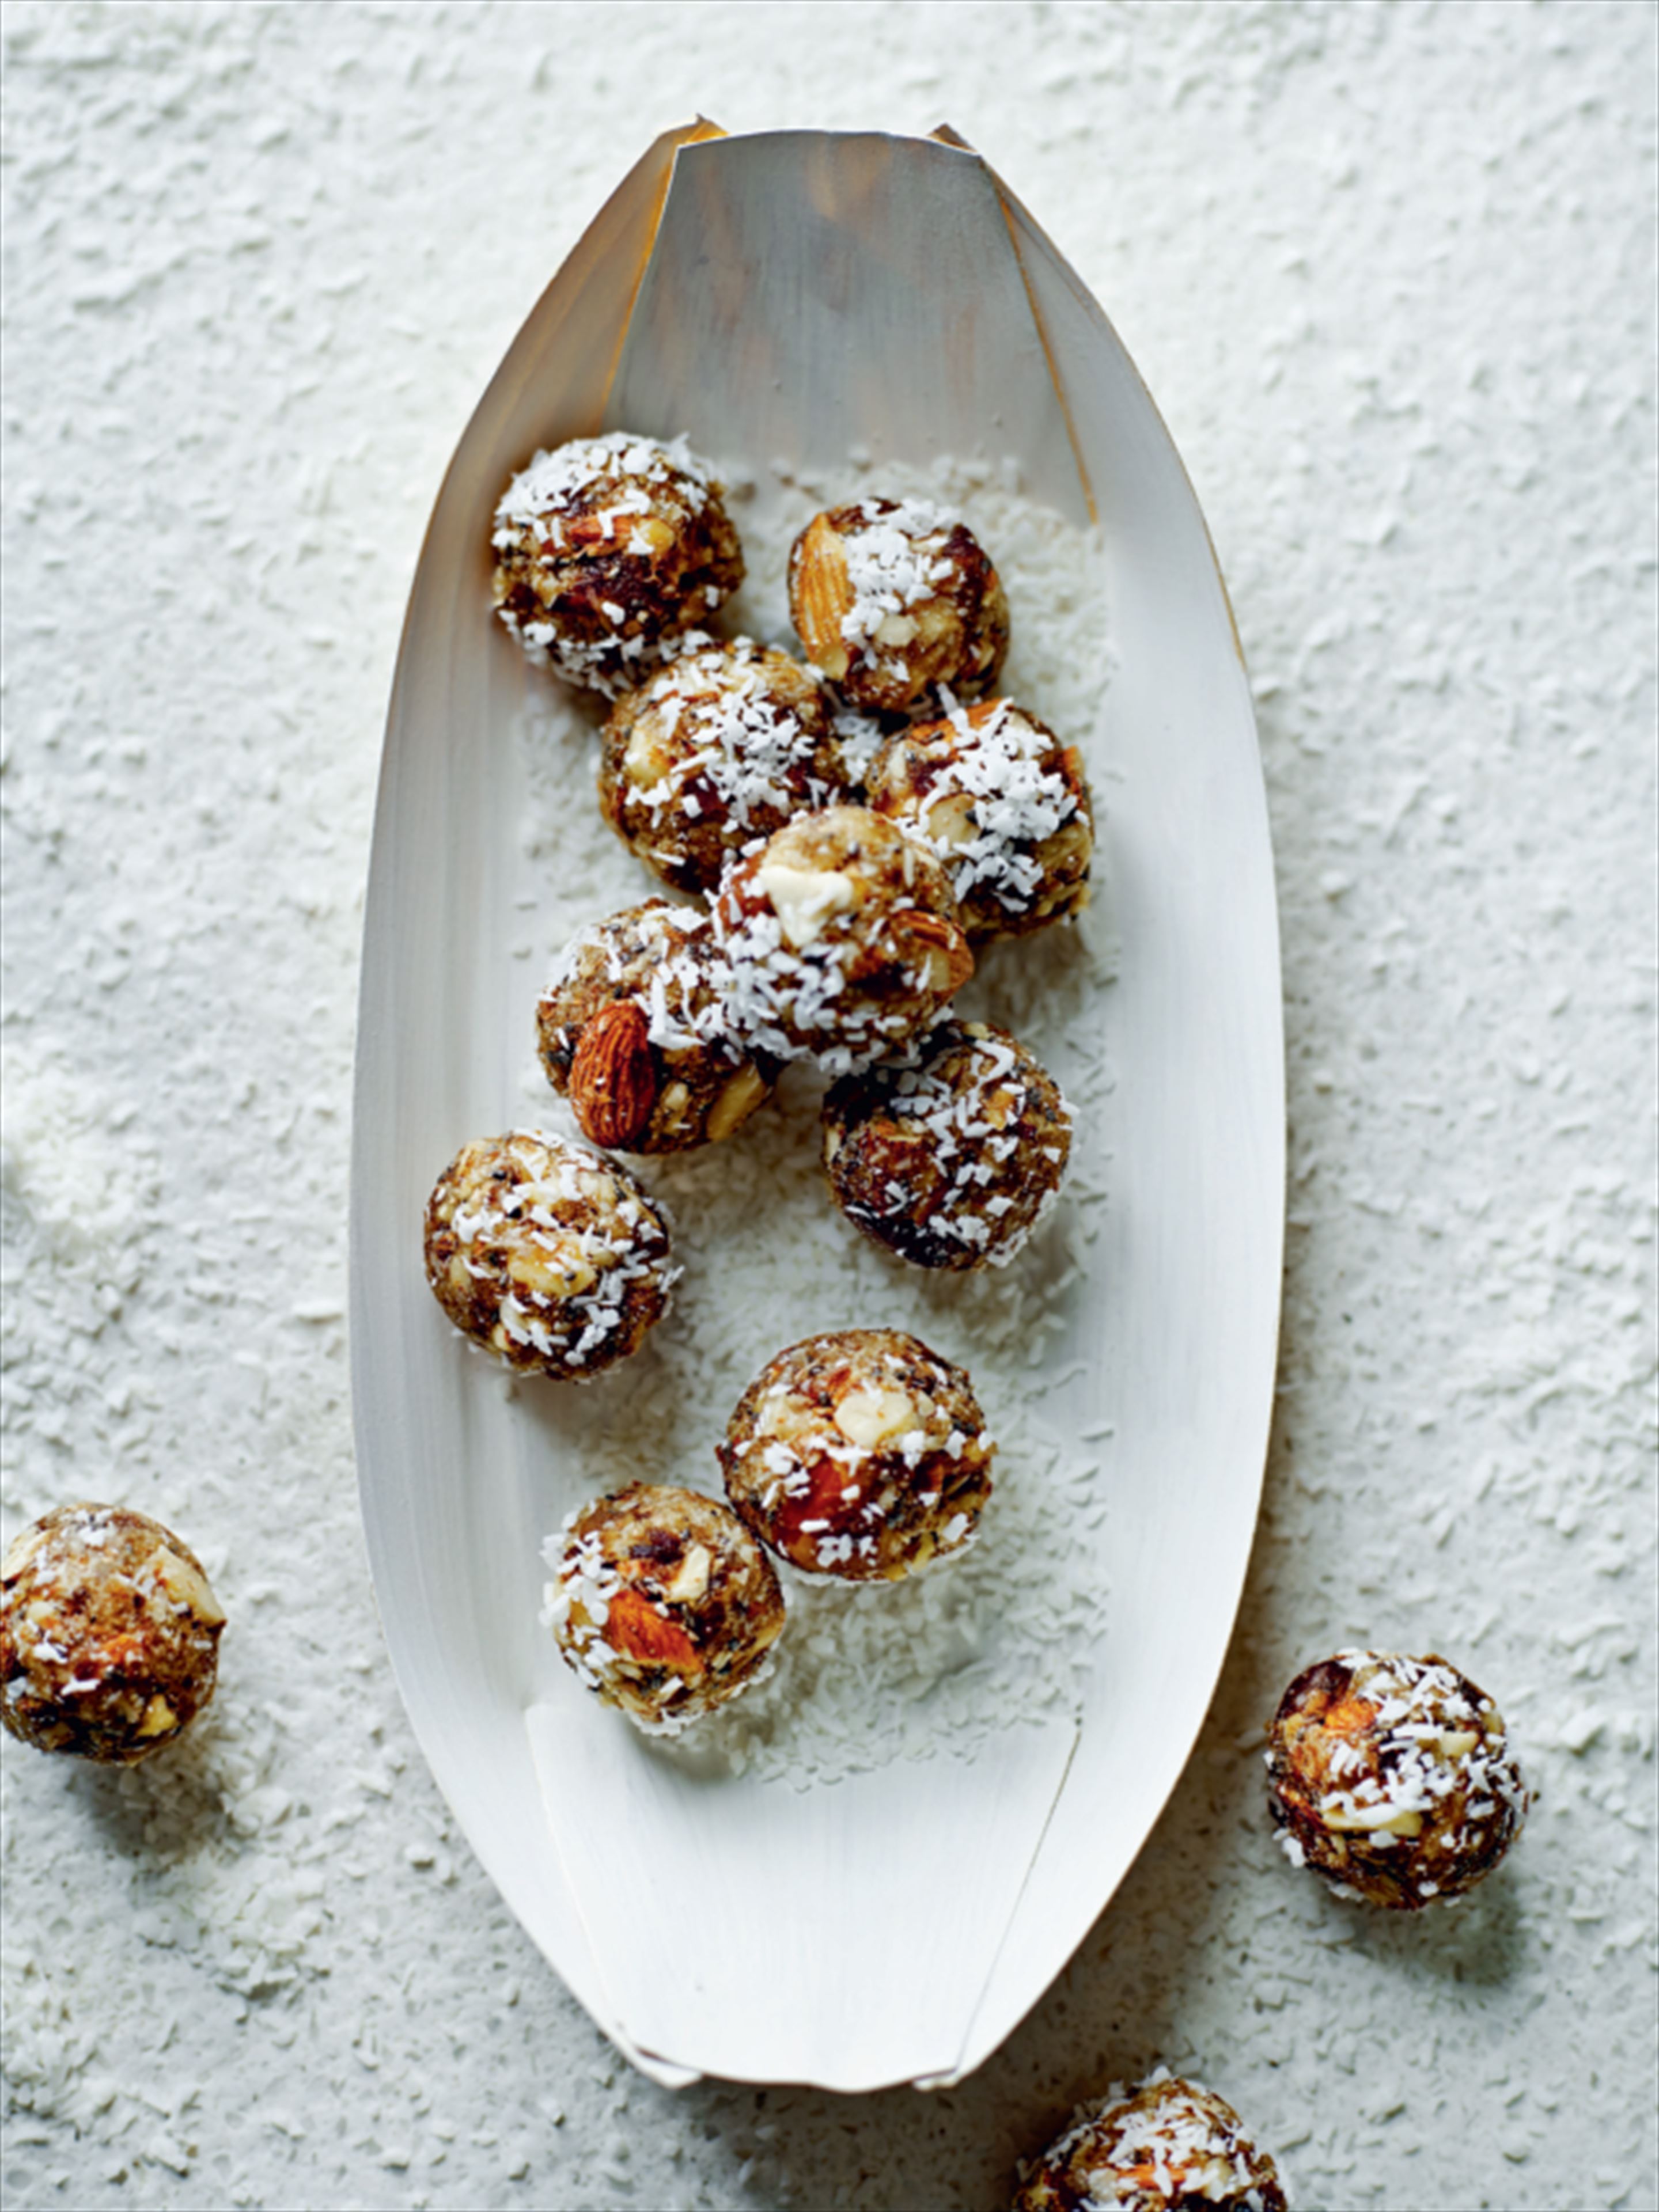 Date, almond and chia balls